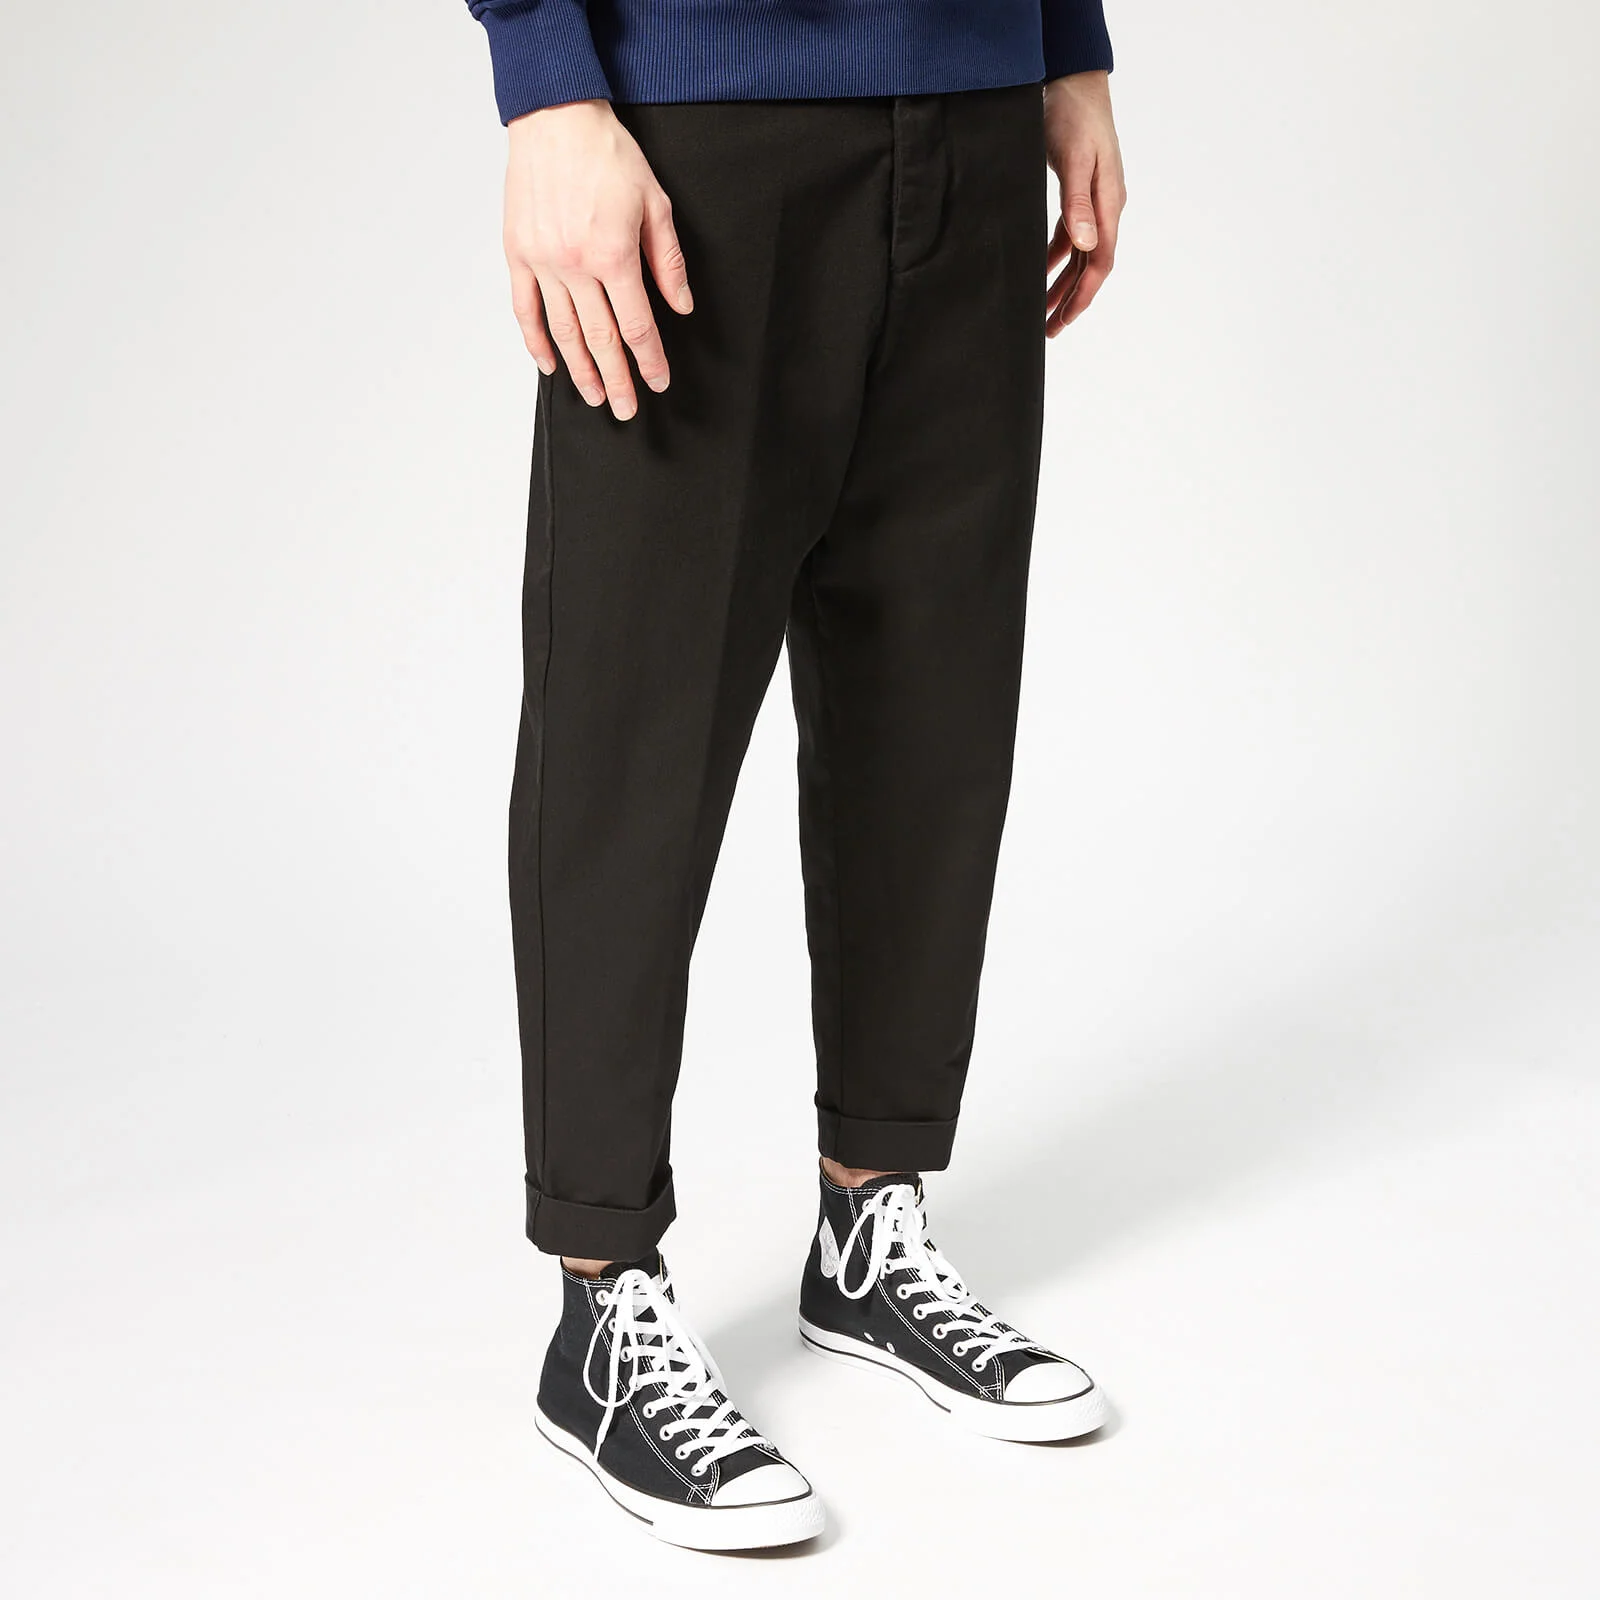 AMI Men's Oversized Carrot Fit Trousers - Black Image 1